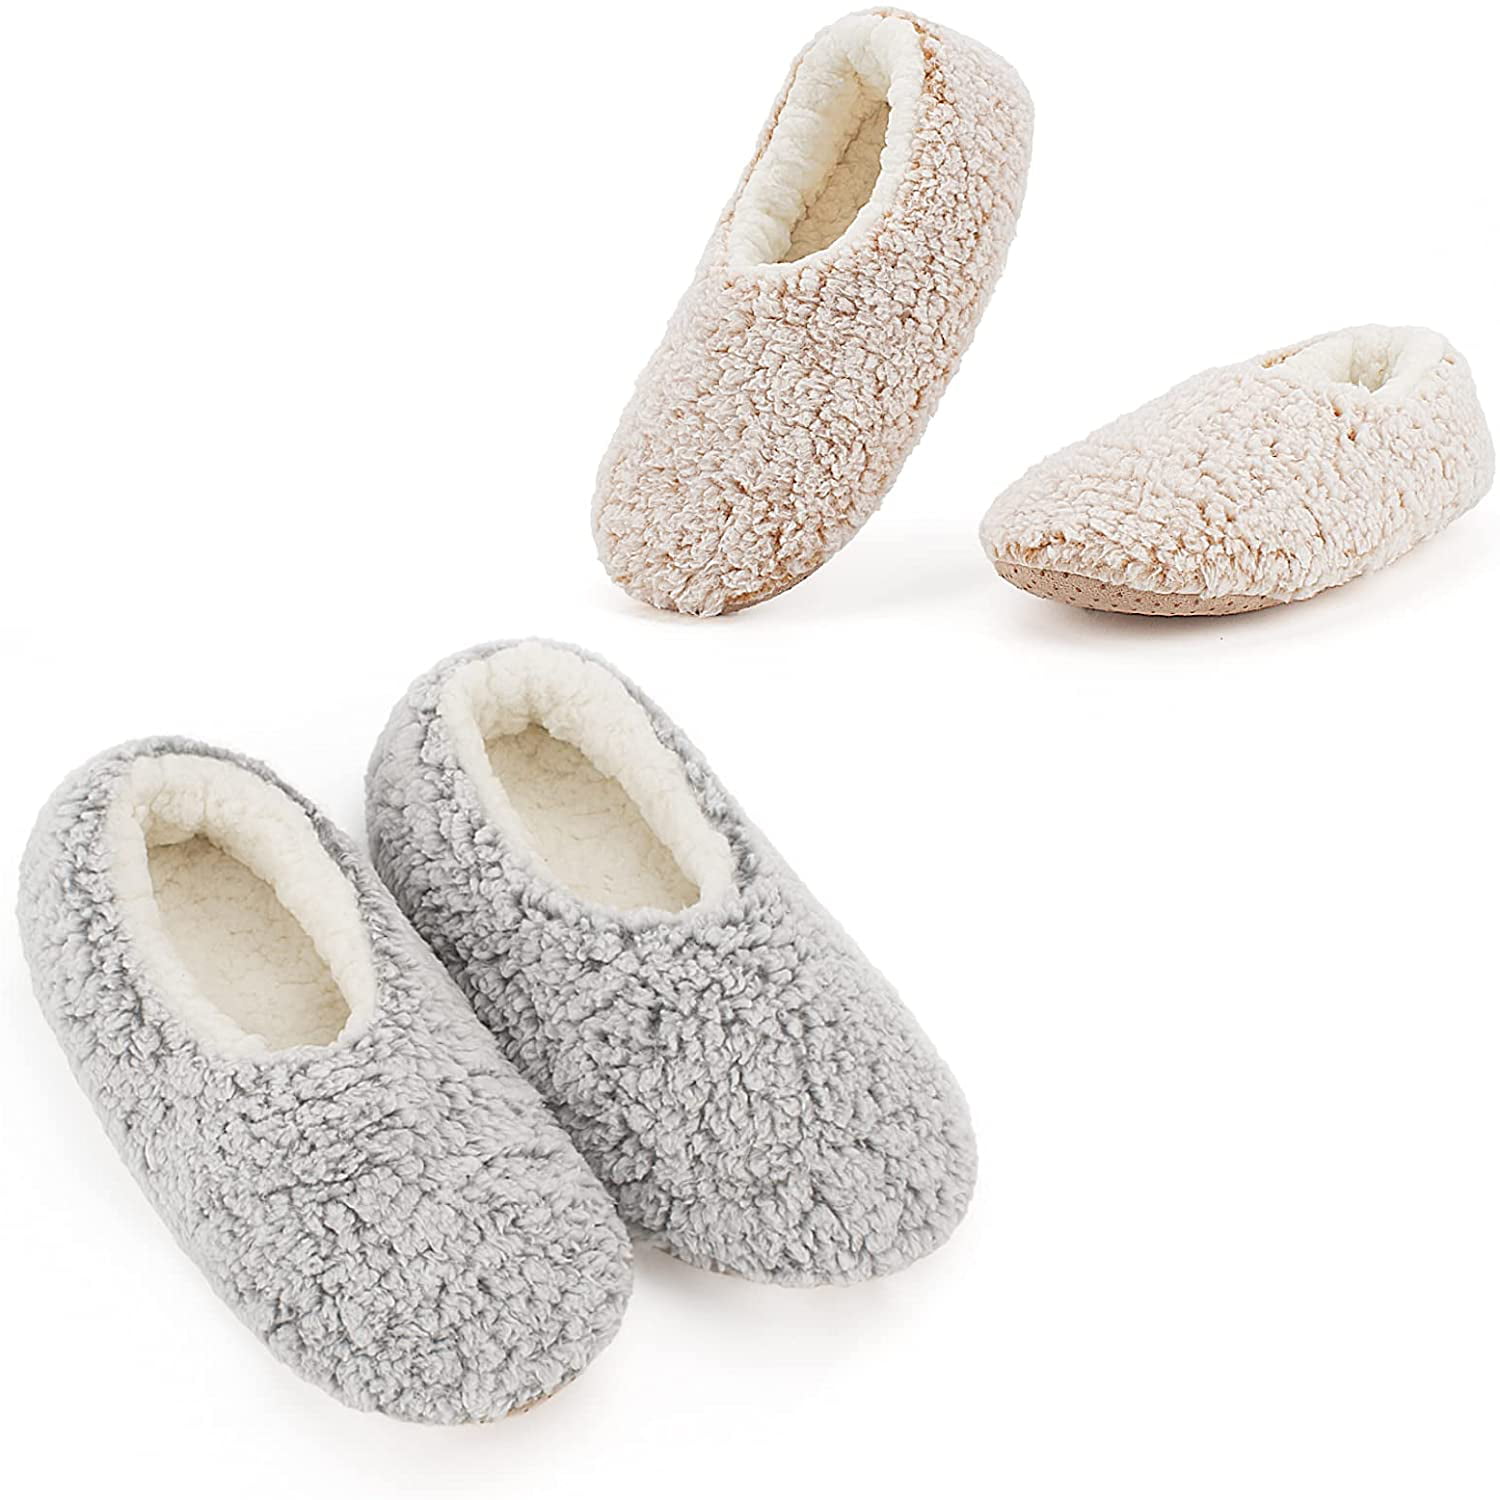 Cable Knitted Non-slip Fluffy Winter House Bedroom Slippers Cozylook 2-Pair Women's Soft Sole Slipper Socks with Grippers Thick Warm Cozy Sherpa Lined Home Socks Set